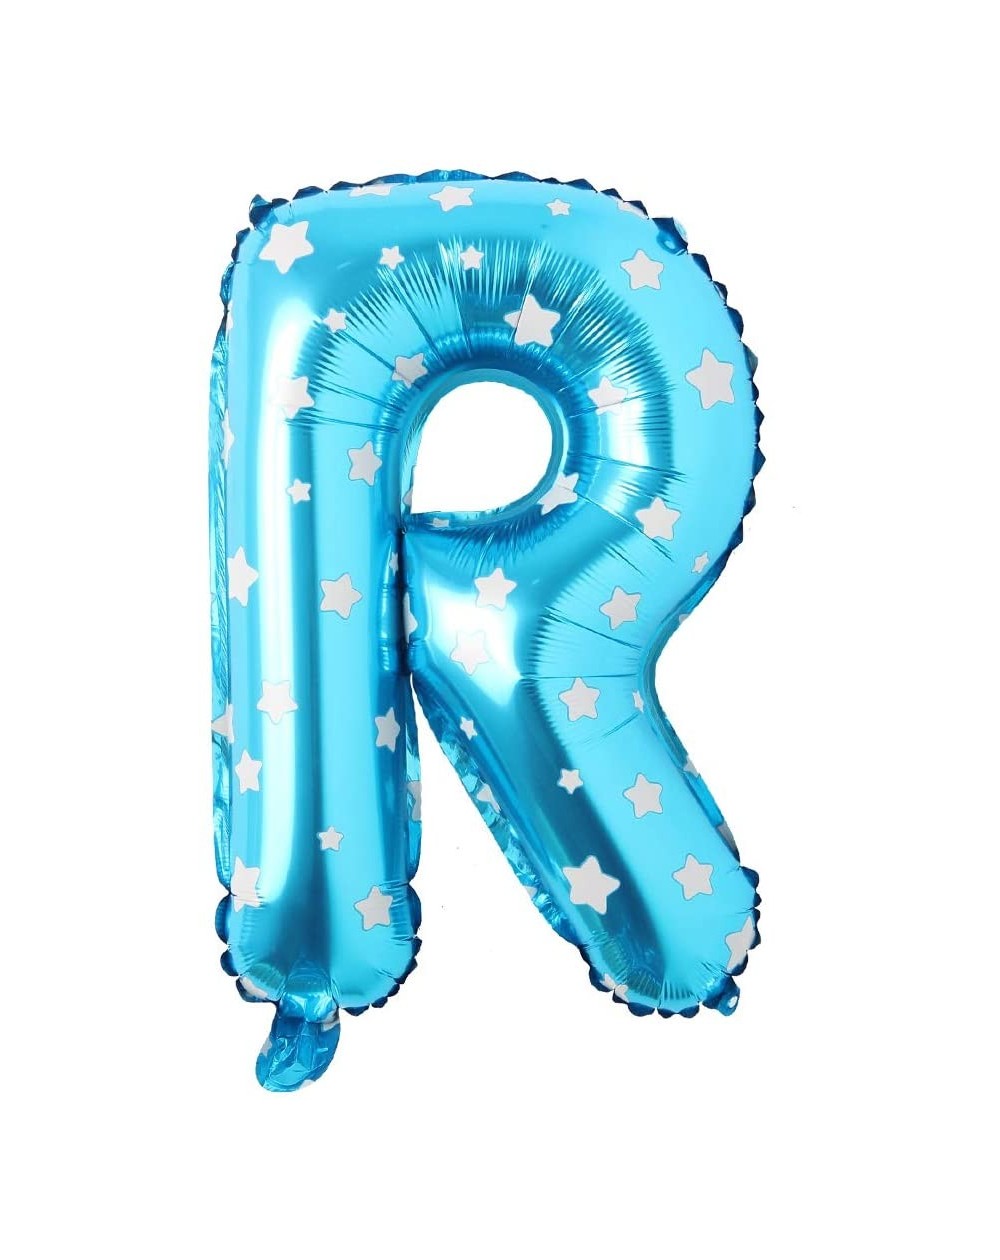 Balloons 16" inch Single Blue with Star Alphabet Letter Number Balloons Aluminum Hanging Foil Film Balloon Wedding Birthday P...